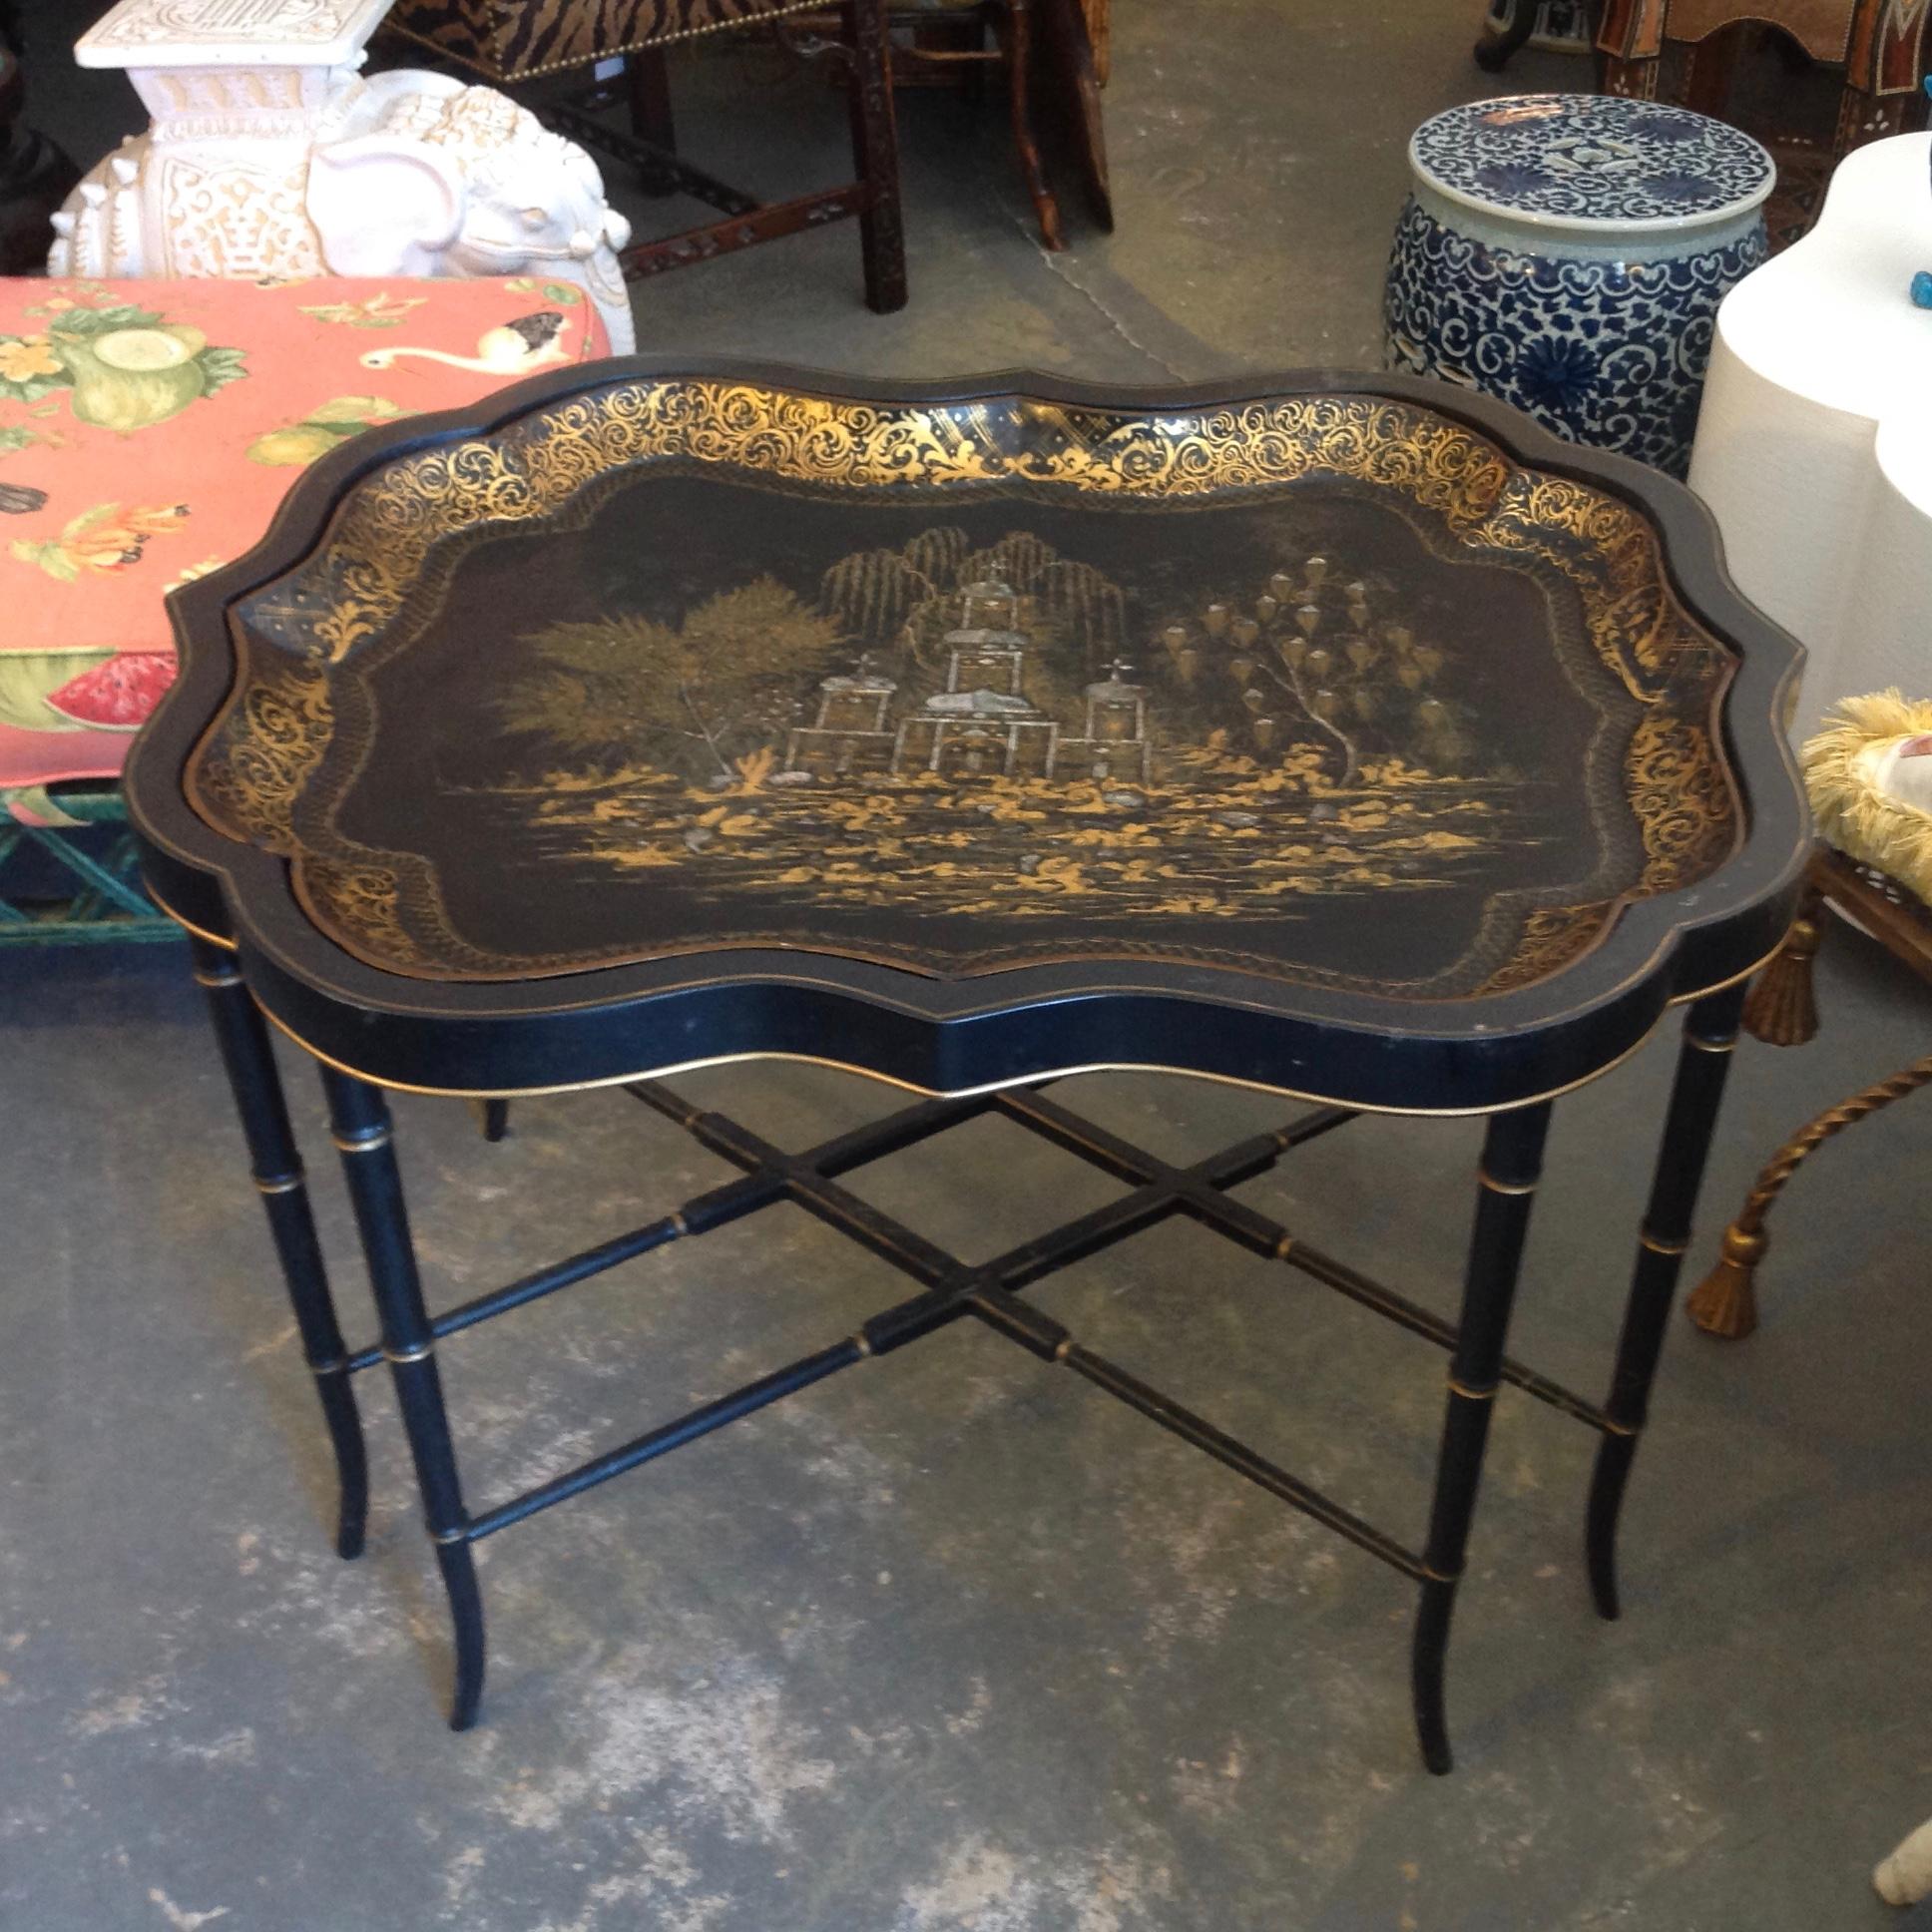 Hand-Painted 19th Century English Chinoiserie Abalone and Gilt Papier Mâché Tray on Stand